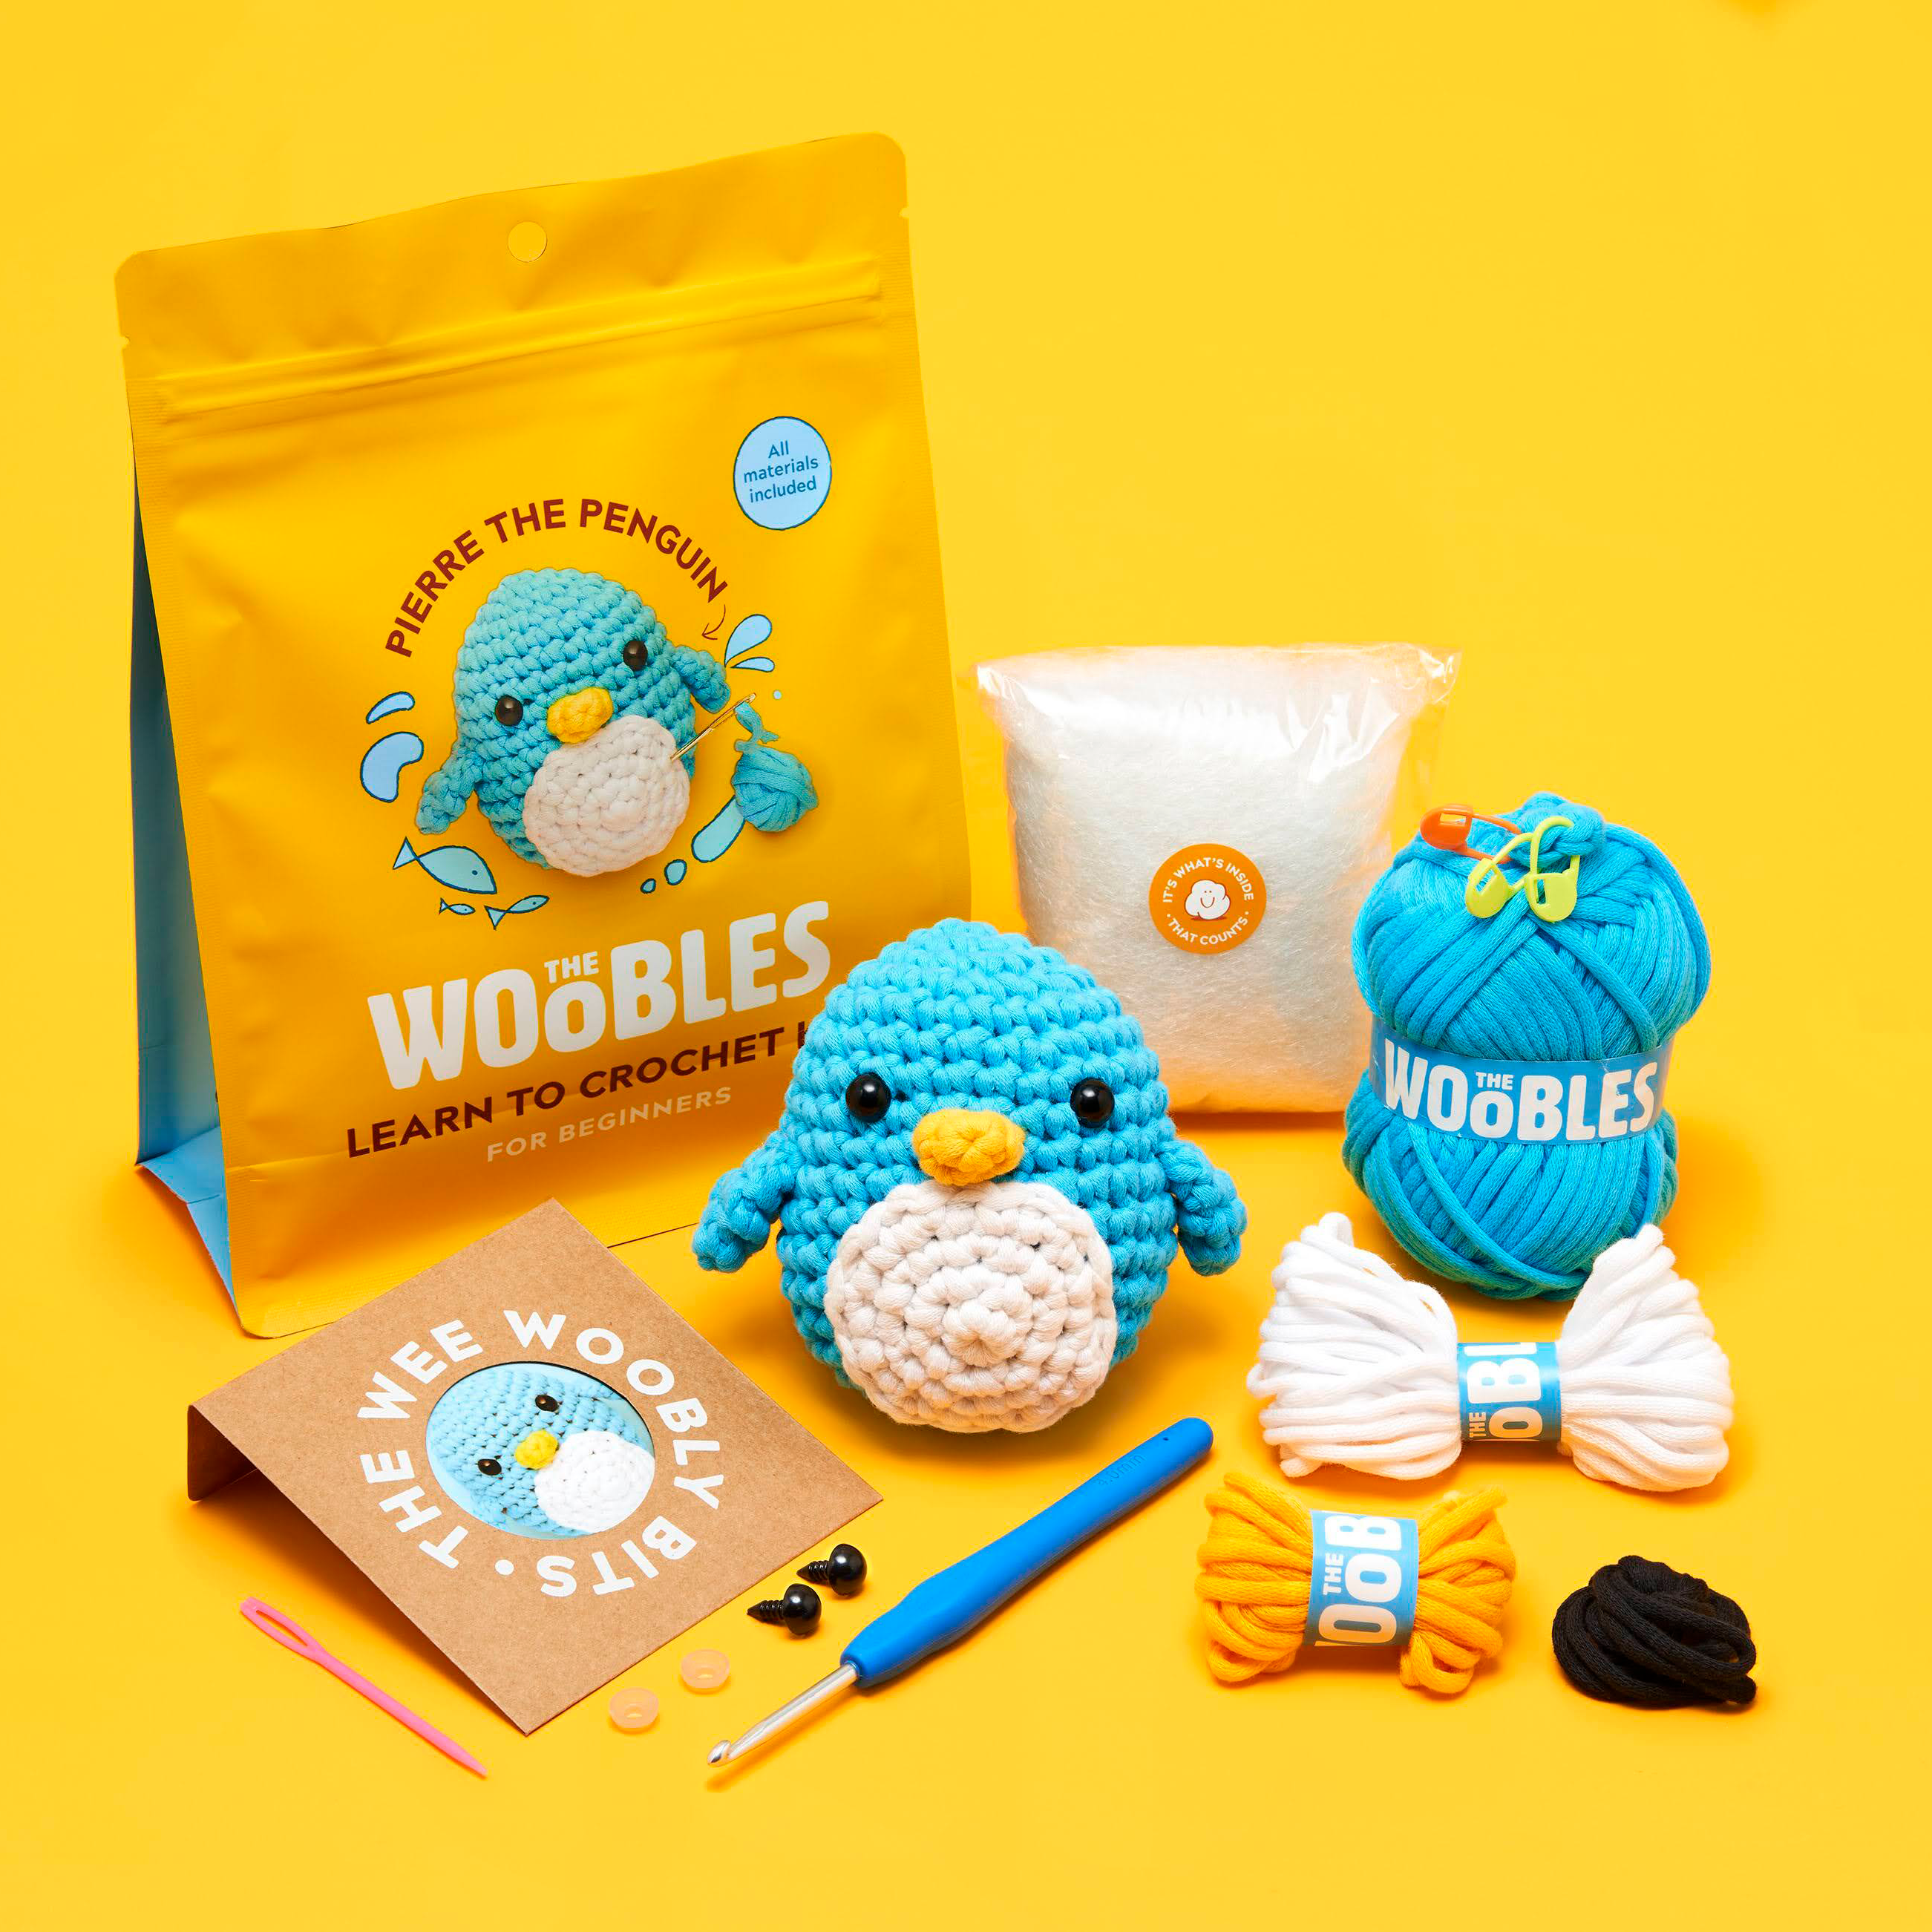 Instructions for Harry Potter x The Woobles kits: get cozy, start